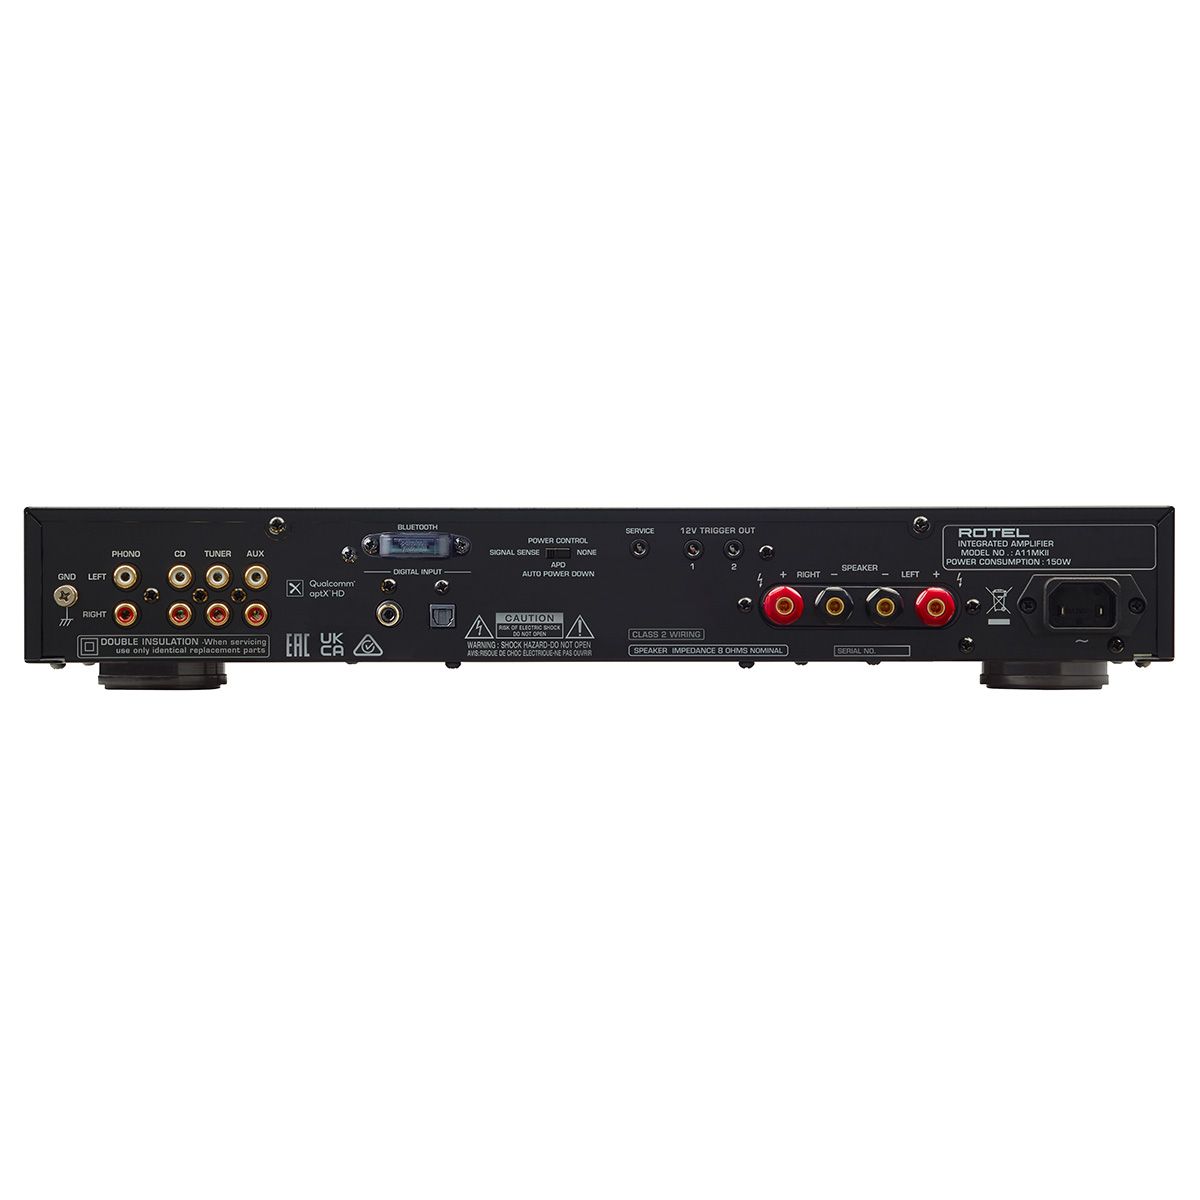 Rotel A11 MKII Integrated Amplifier rear view